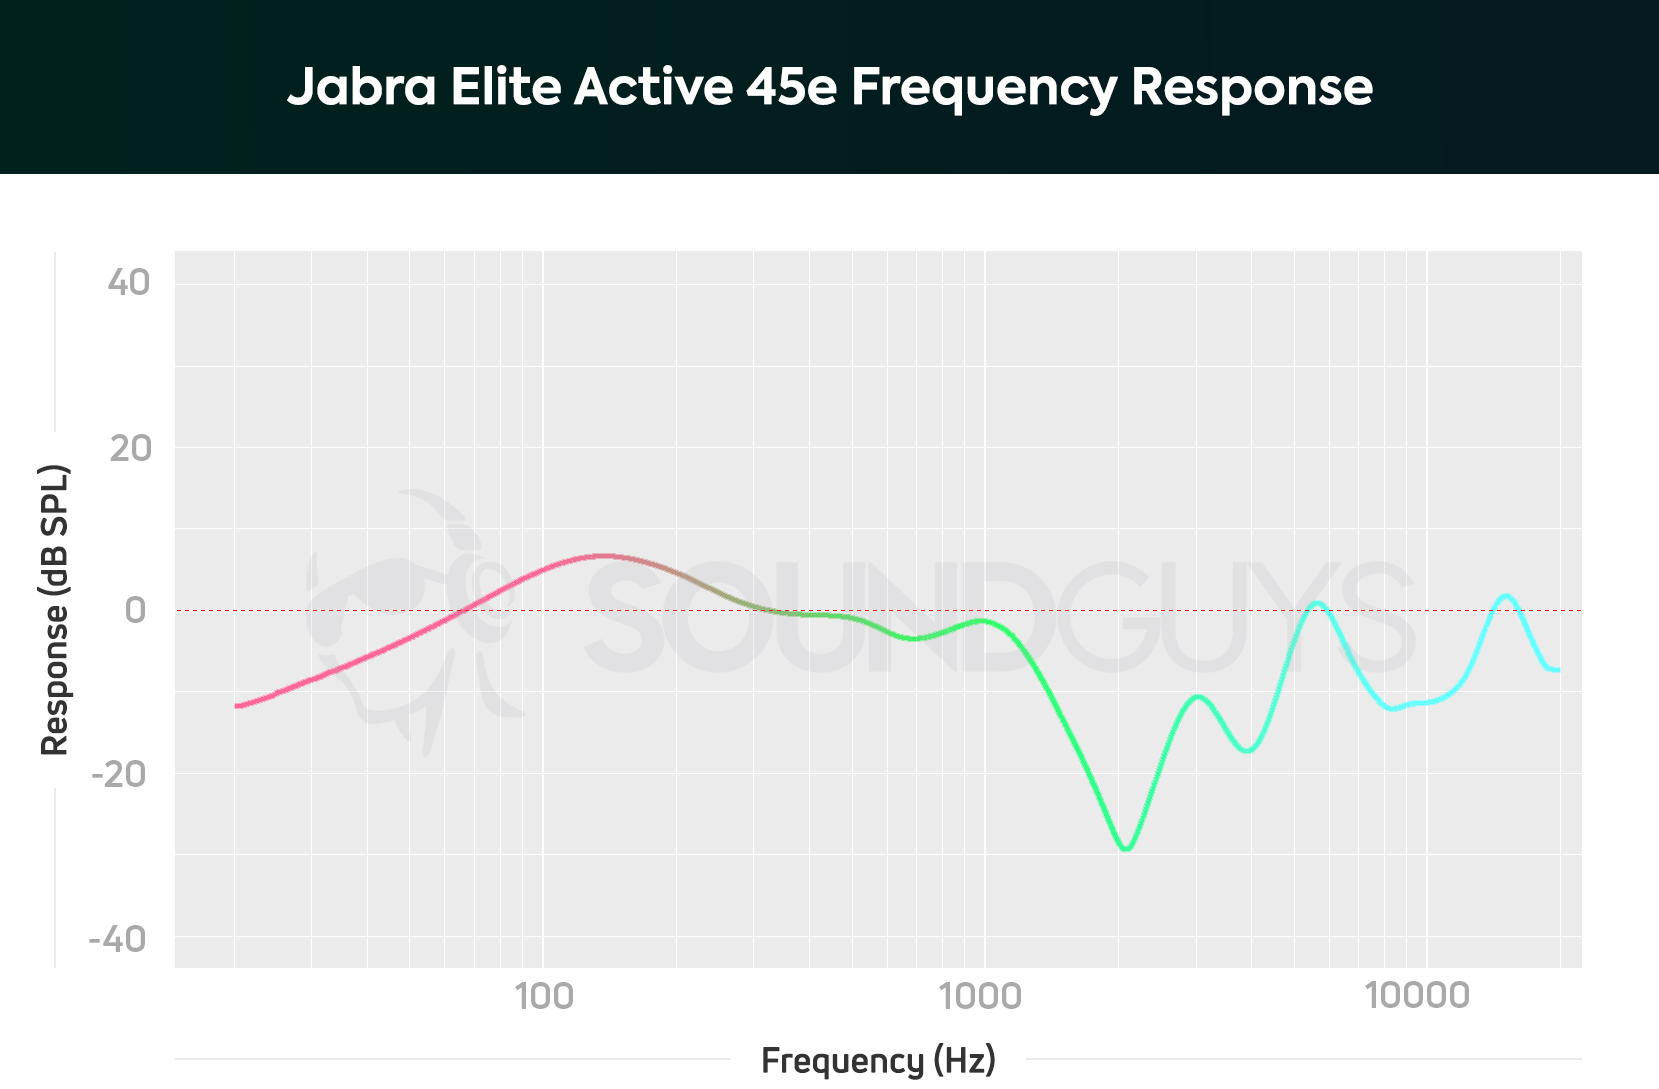 The Jabra Elite Active 45e frequency response chart depicts attenuated sub-bass notes, because of the unsealed ear tip design.